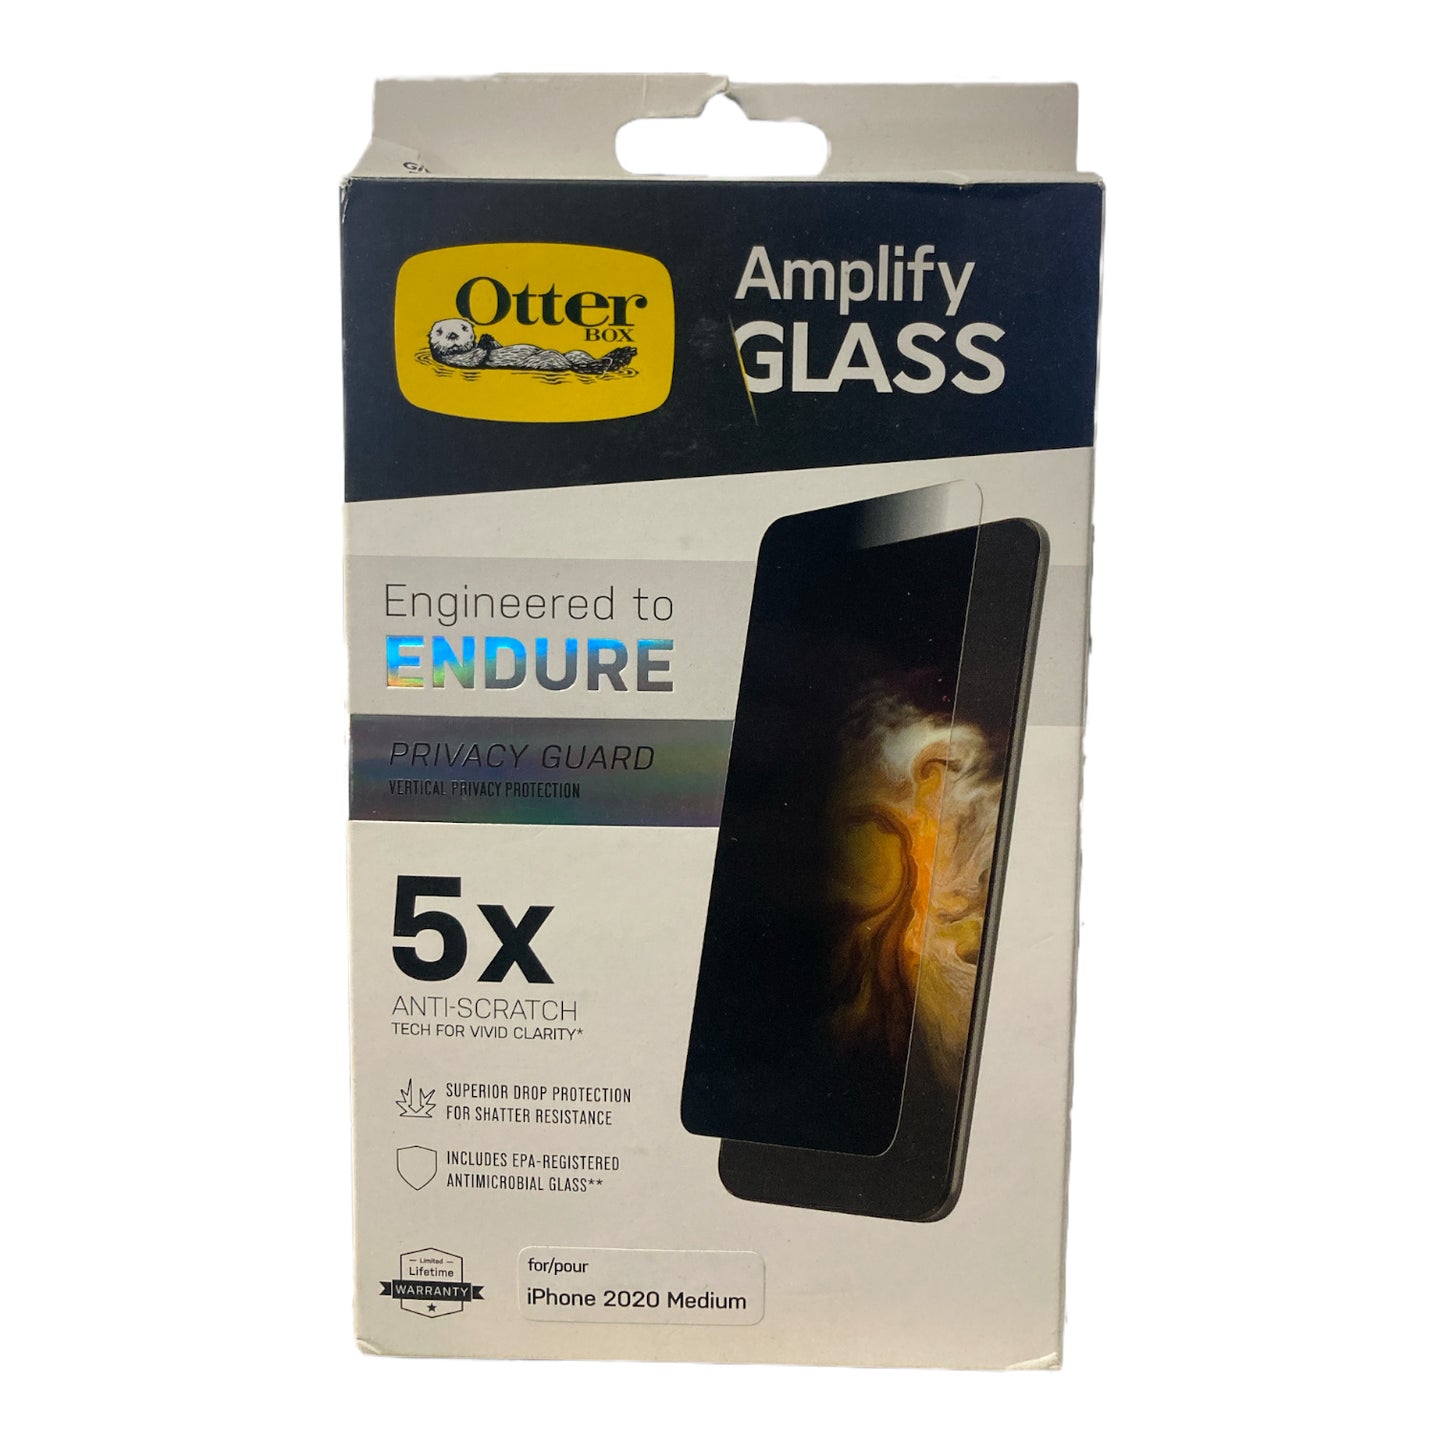 Otterbox Amplify Privacy Glass Screen Protector for iPhone 12, 12 Pro